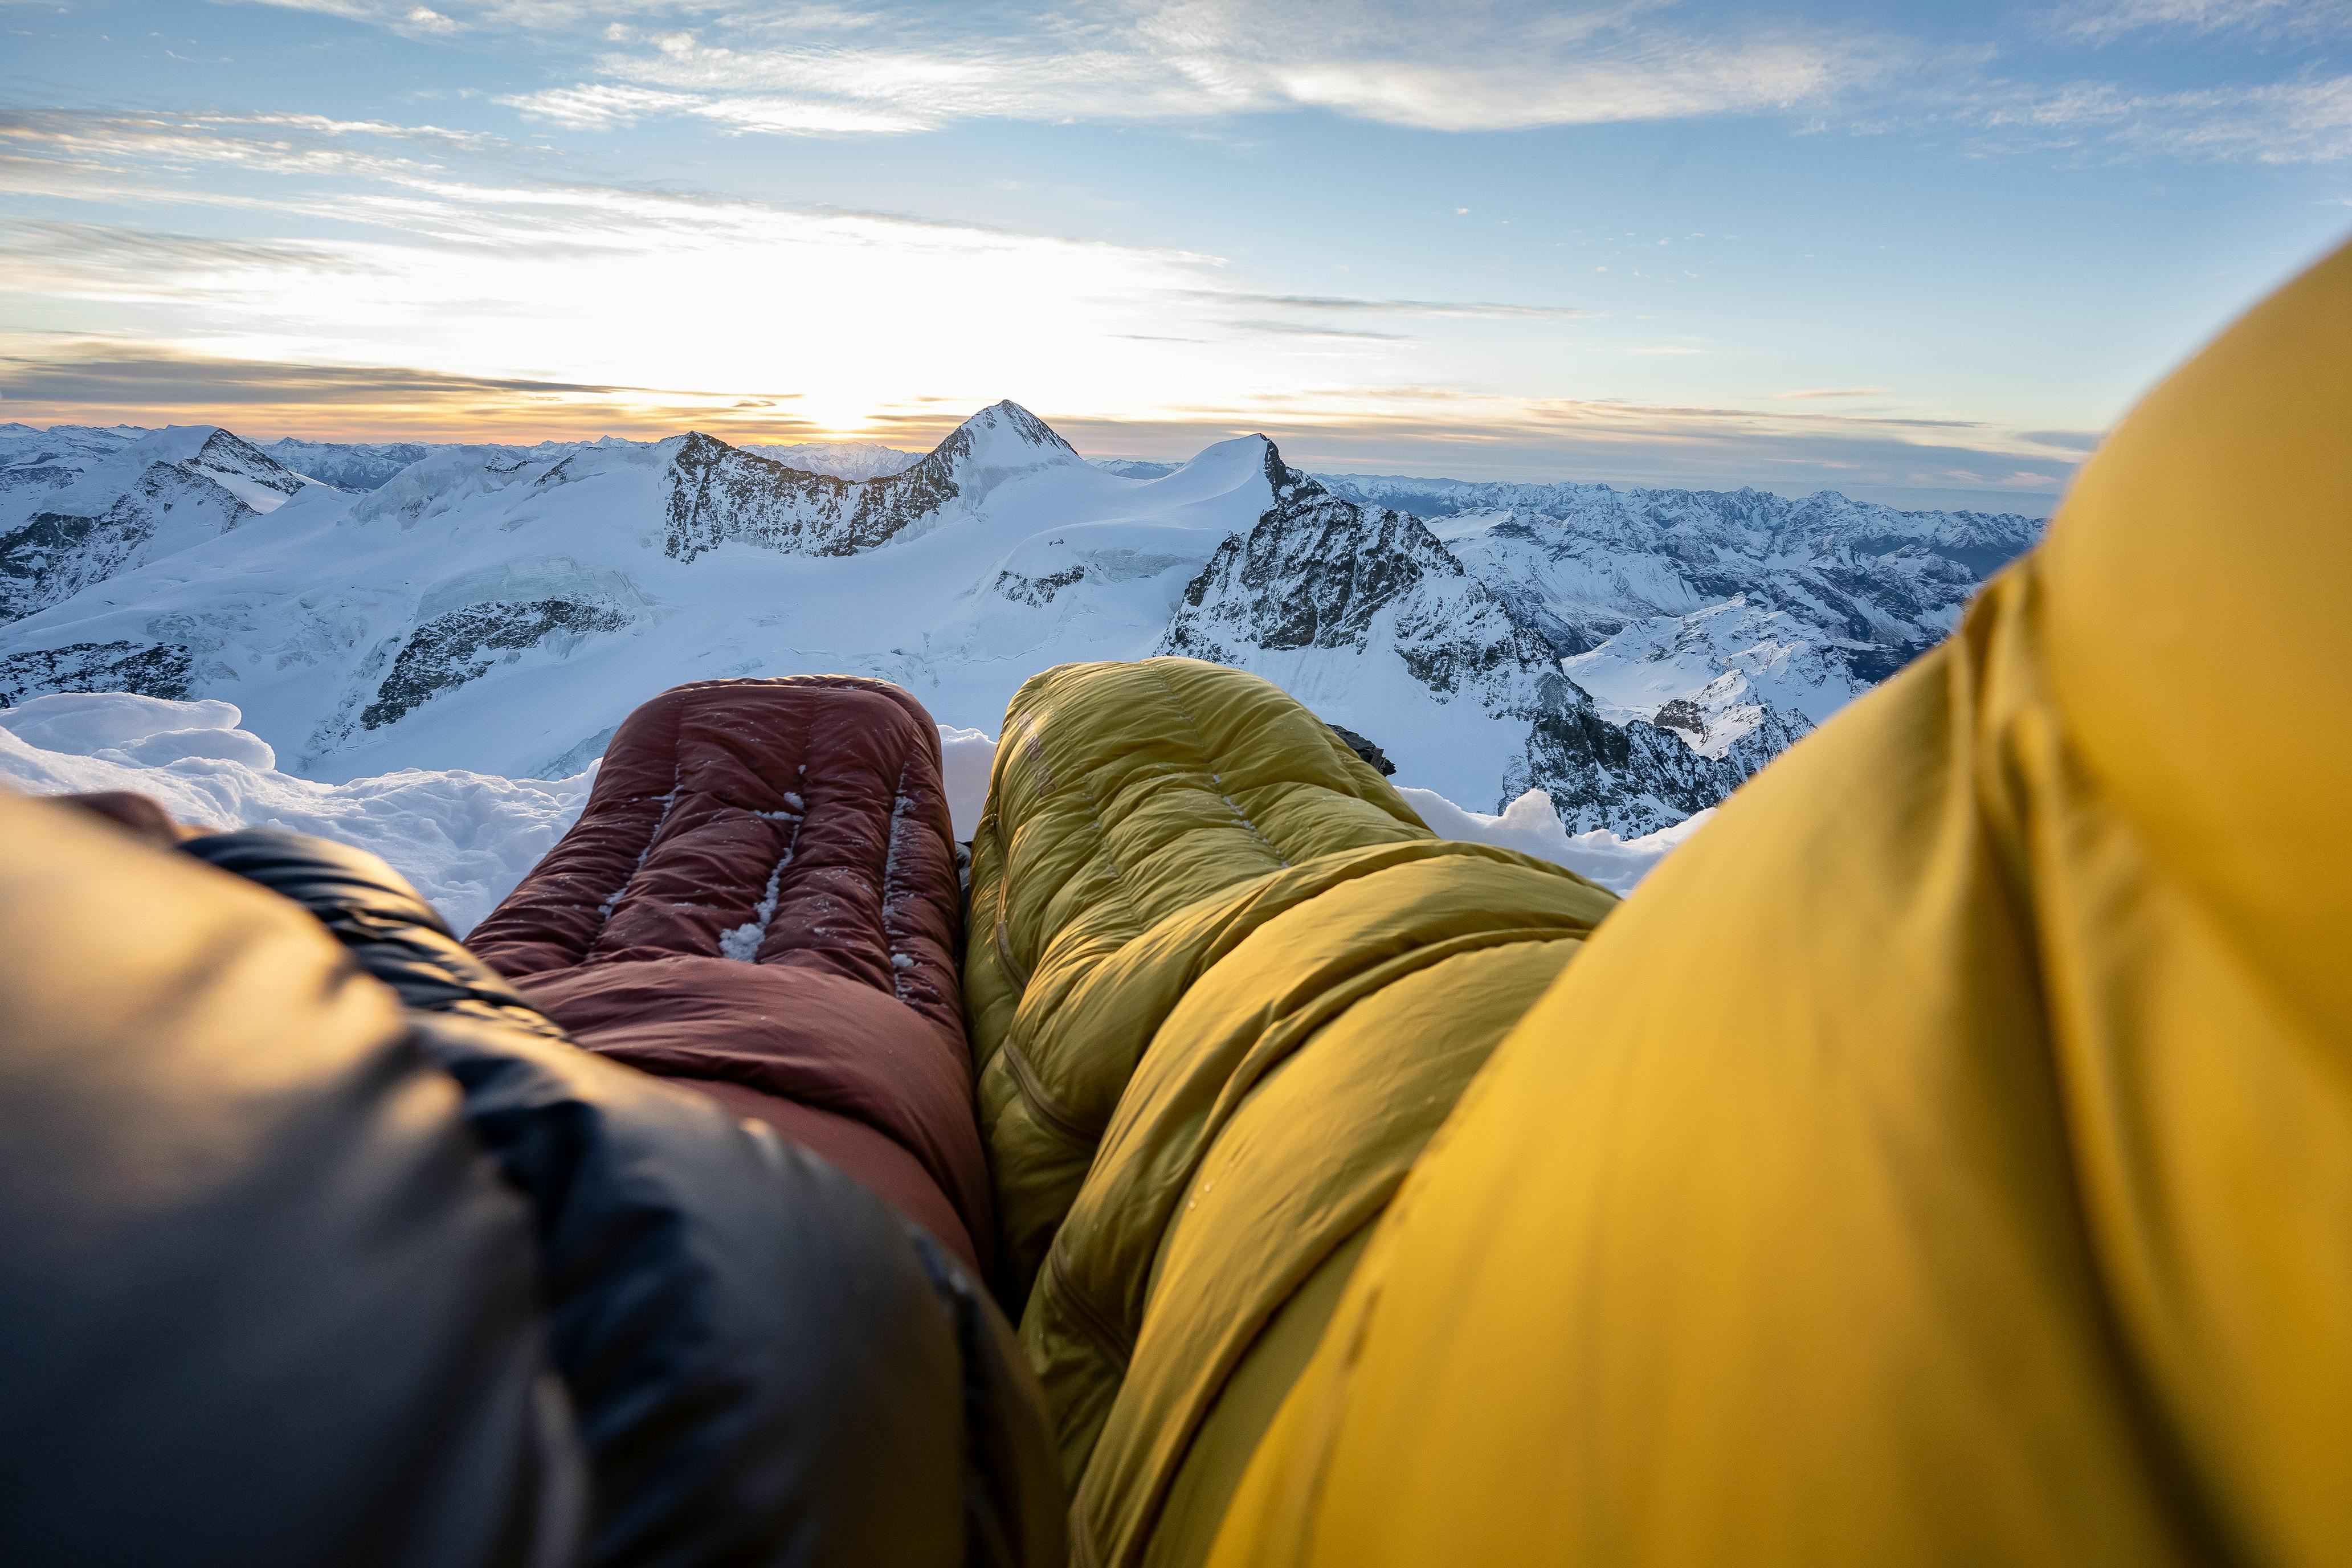 Looking down at two sleeping bags, a yellow and red one, and out at the snowy sunset mountain scenery beyond.